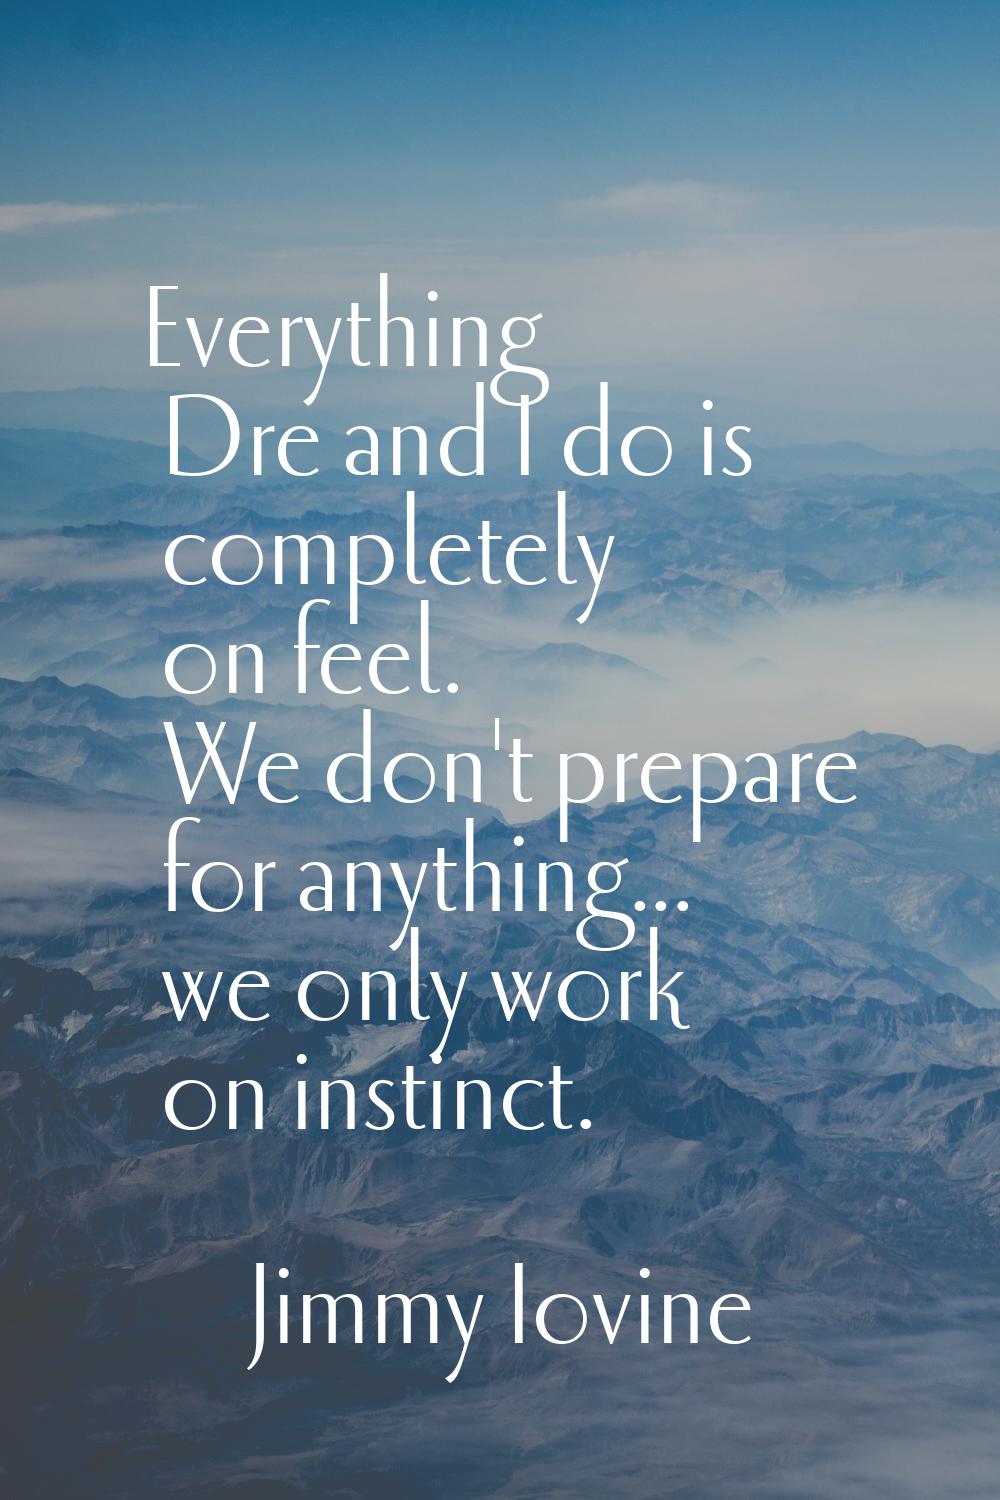 Everything Dre and I do is completely on feel. We don't prepare for anything... we only work on ins